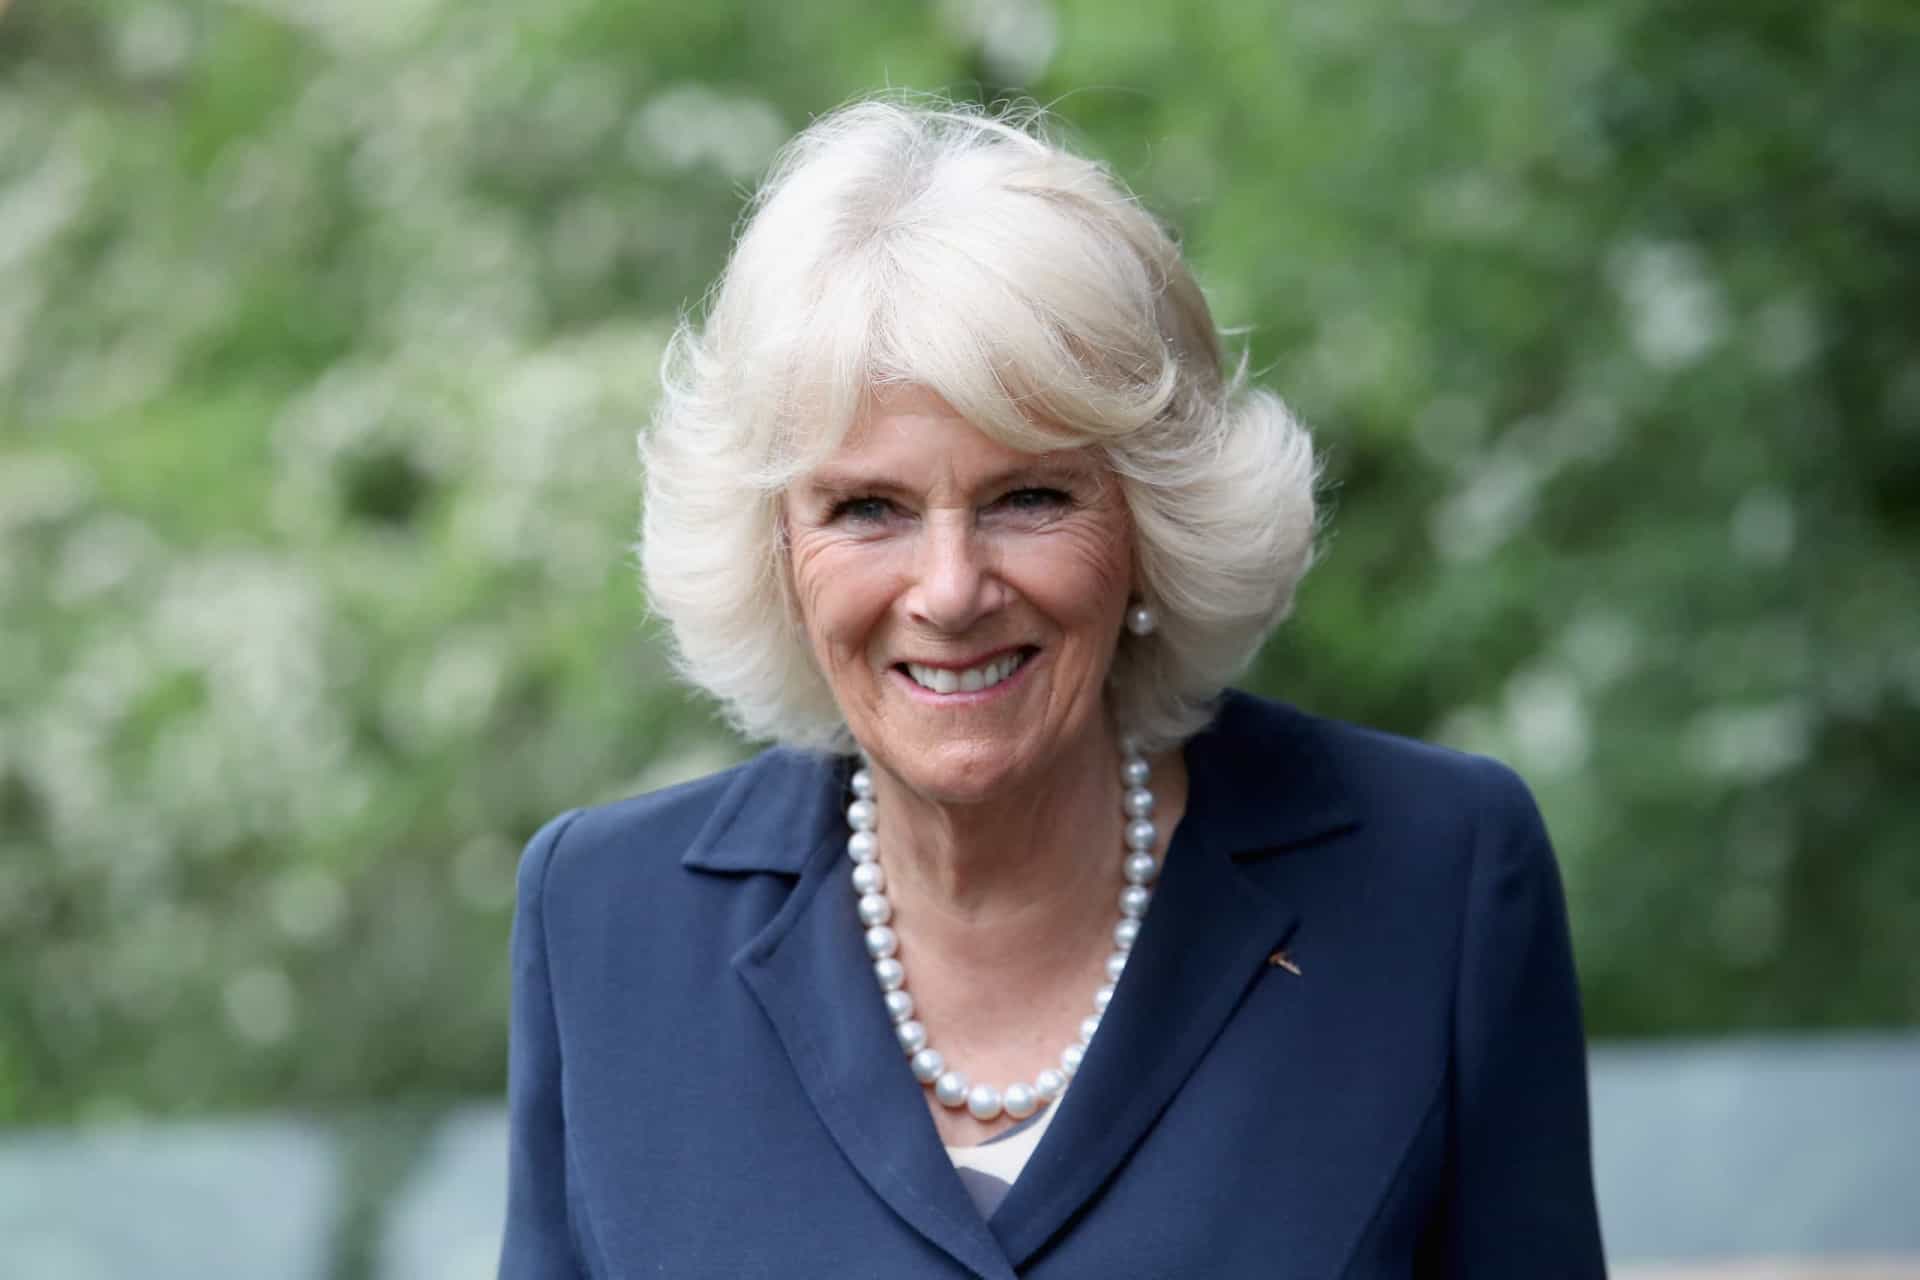 <p>But due to the popular association with Princess Diana, the now-queen consort was instead styled as the Duchess of Cornwall.</p><p><a href="https://www.msn.com/en-us/community/channel/vid-7xx8mnucu55yw63we9va2gwr7uihbxwc68fxqp25x6tg4ftibpra?cvid=94631541bc0f4f89bfd59158d696ad7e">Follow us and access great exclusive content everyday</a></p>